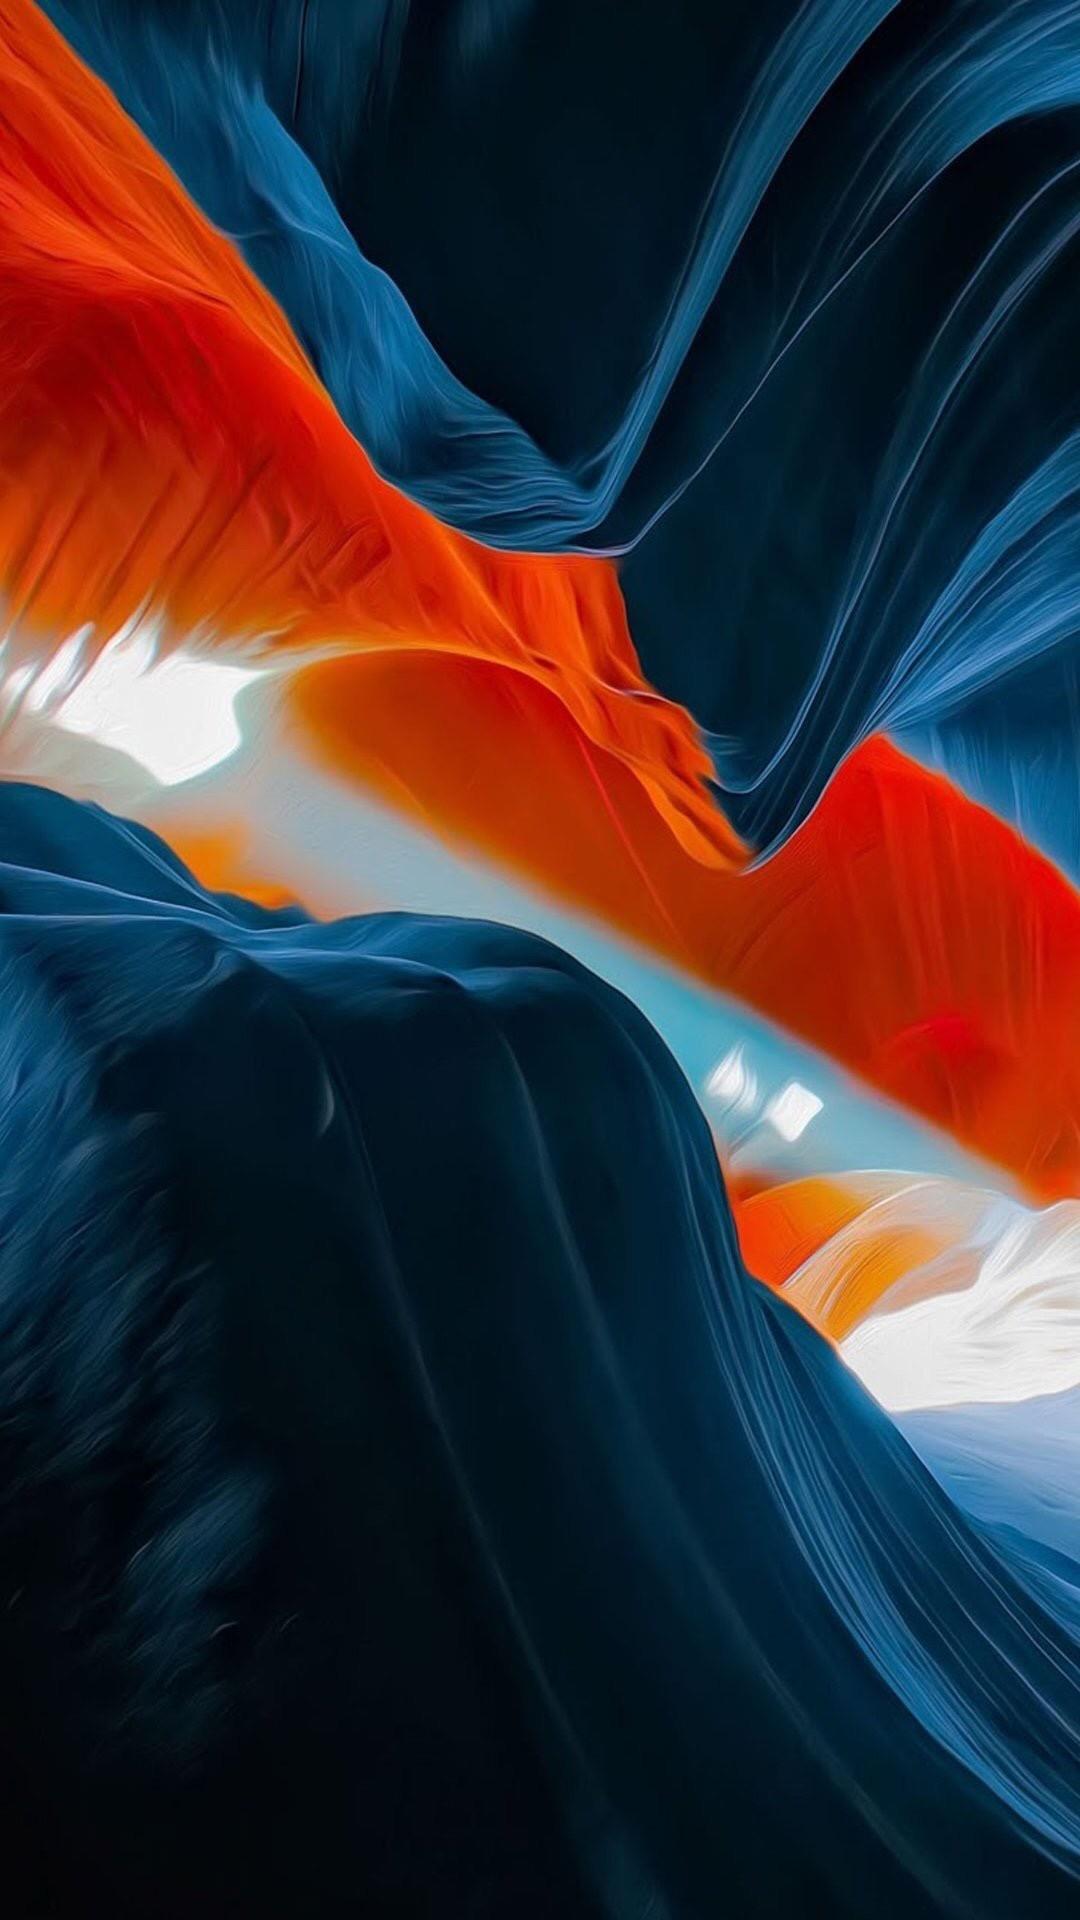 New iPhone Wallpapers - Wallpaper Cave